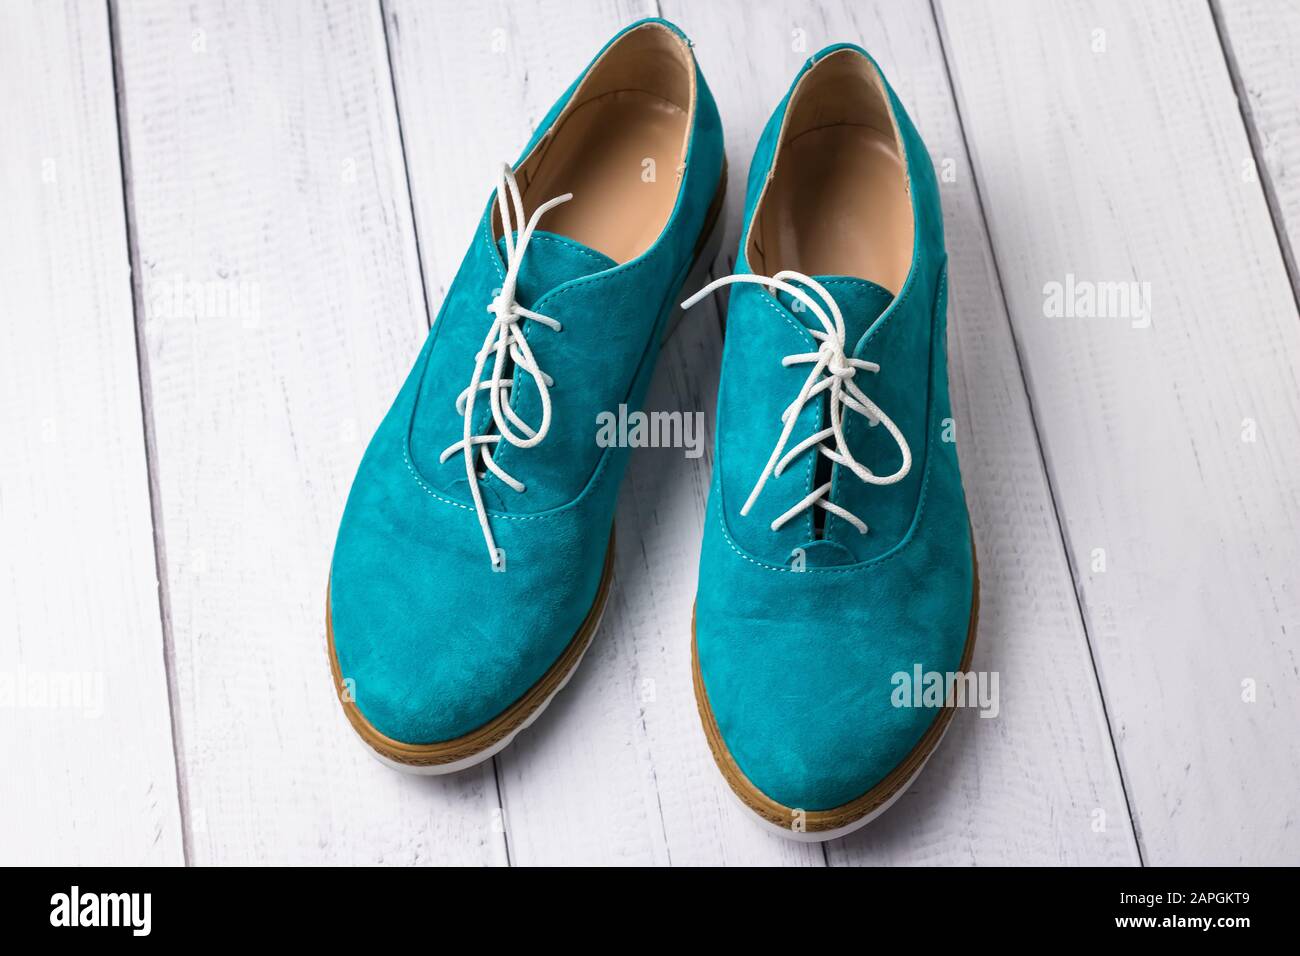 Pair of green casual suede shoes with 